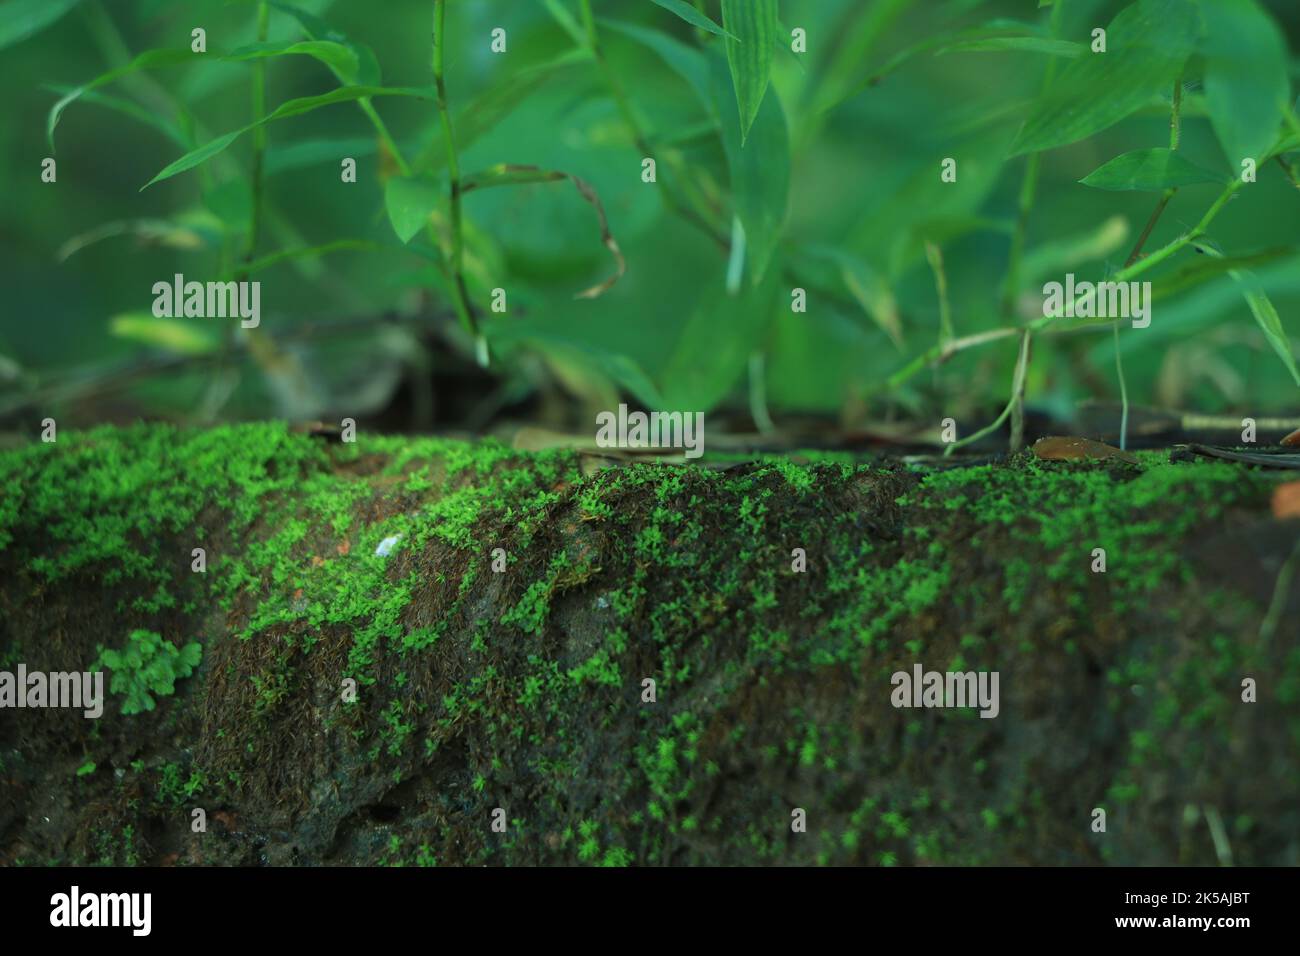 Green moss growing on wall surface Stock Photo